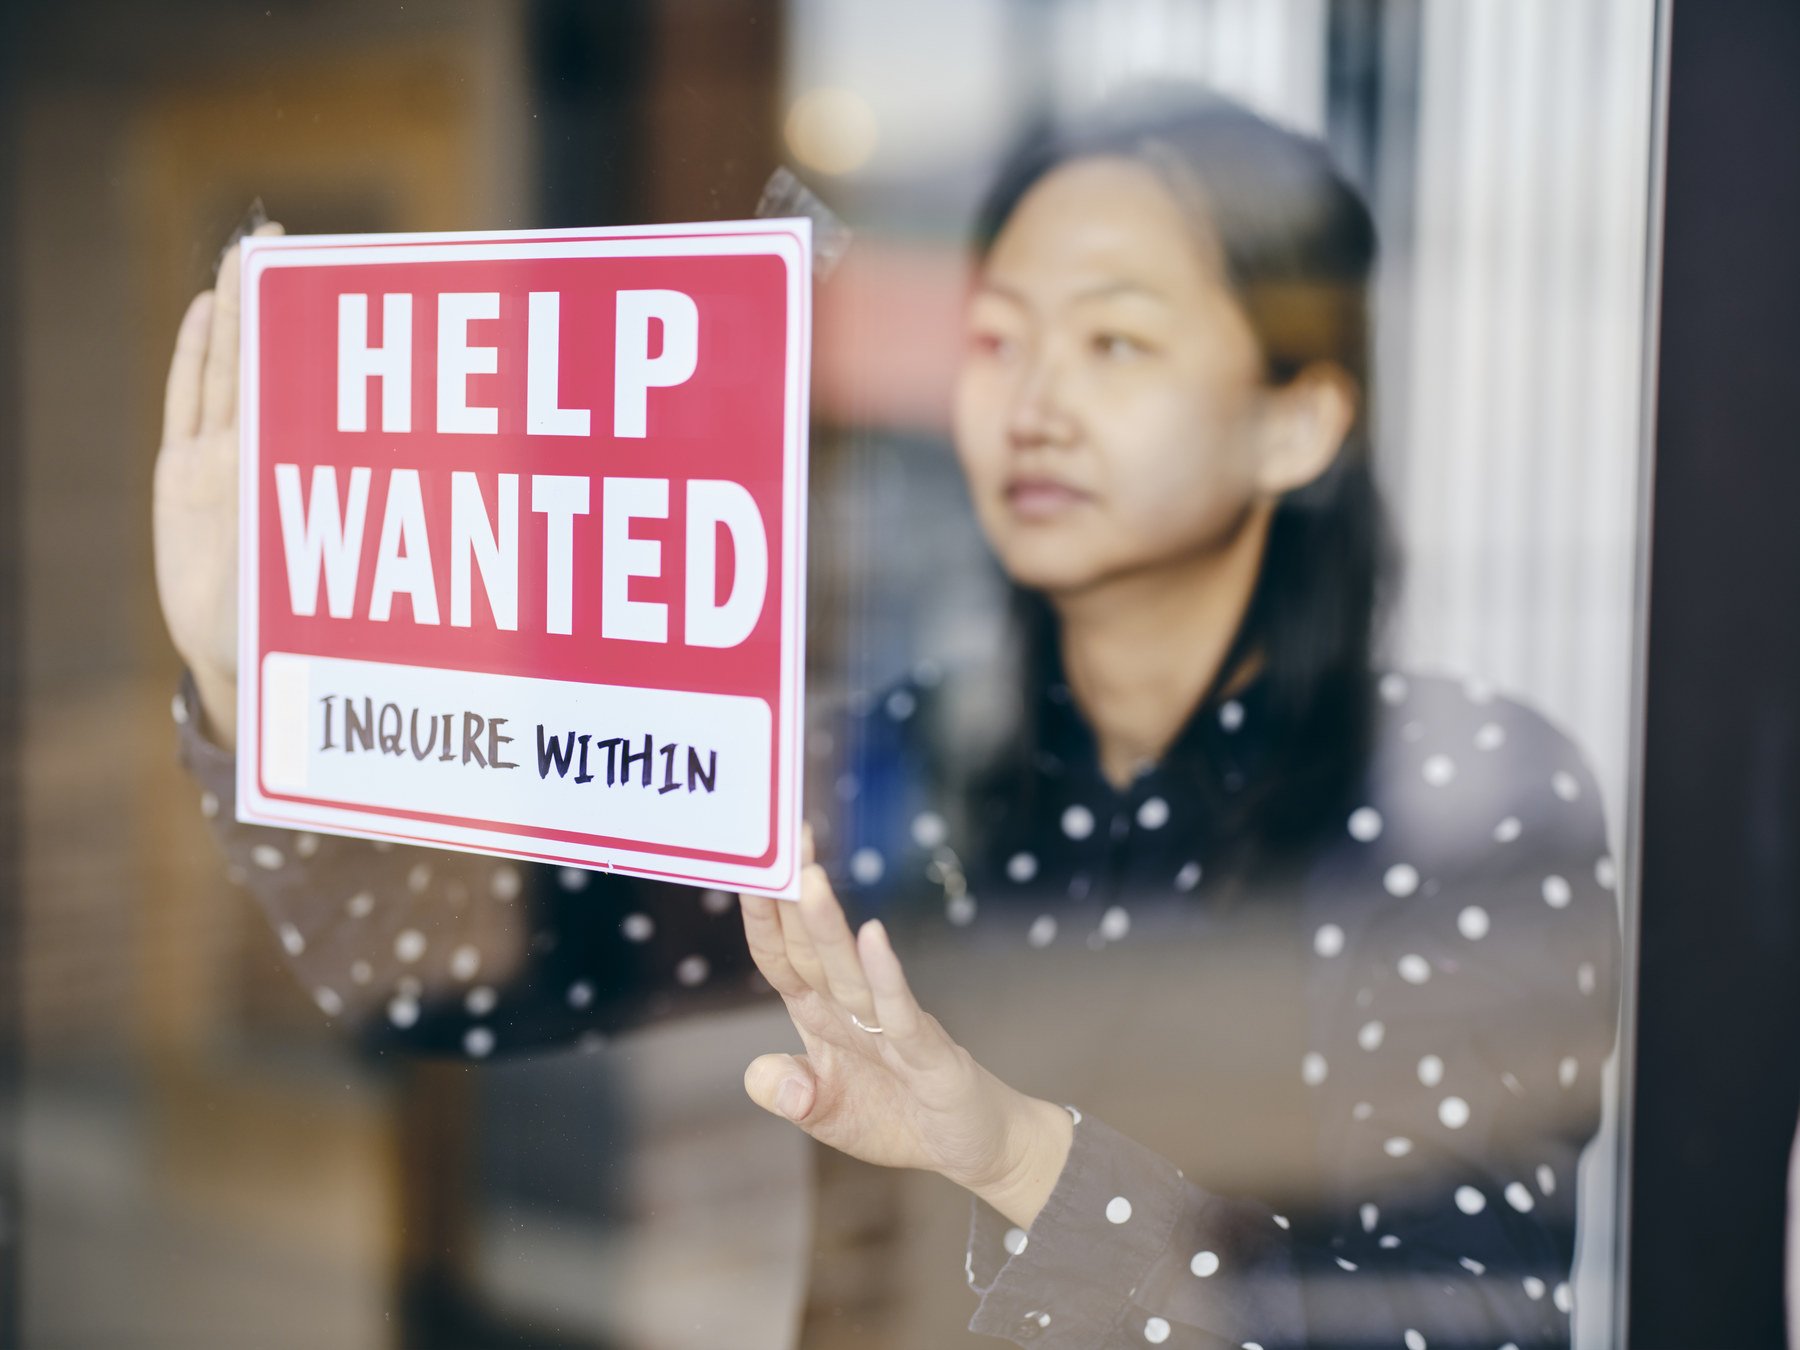 A small business owner putting up a help wanted sign in her store window